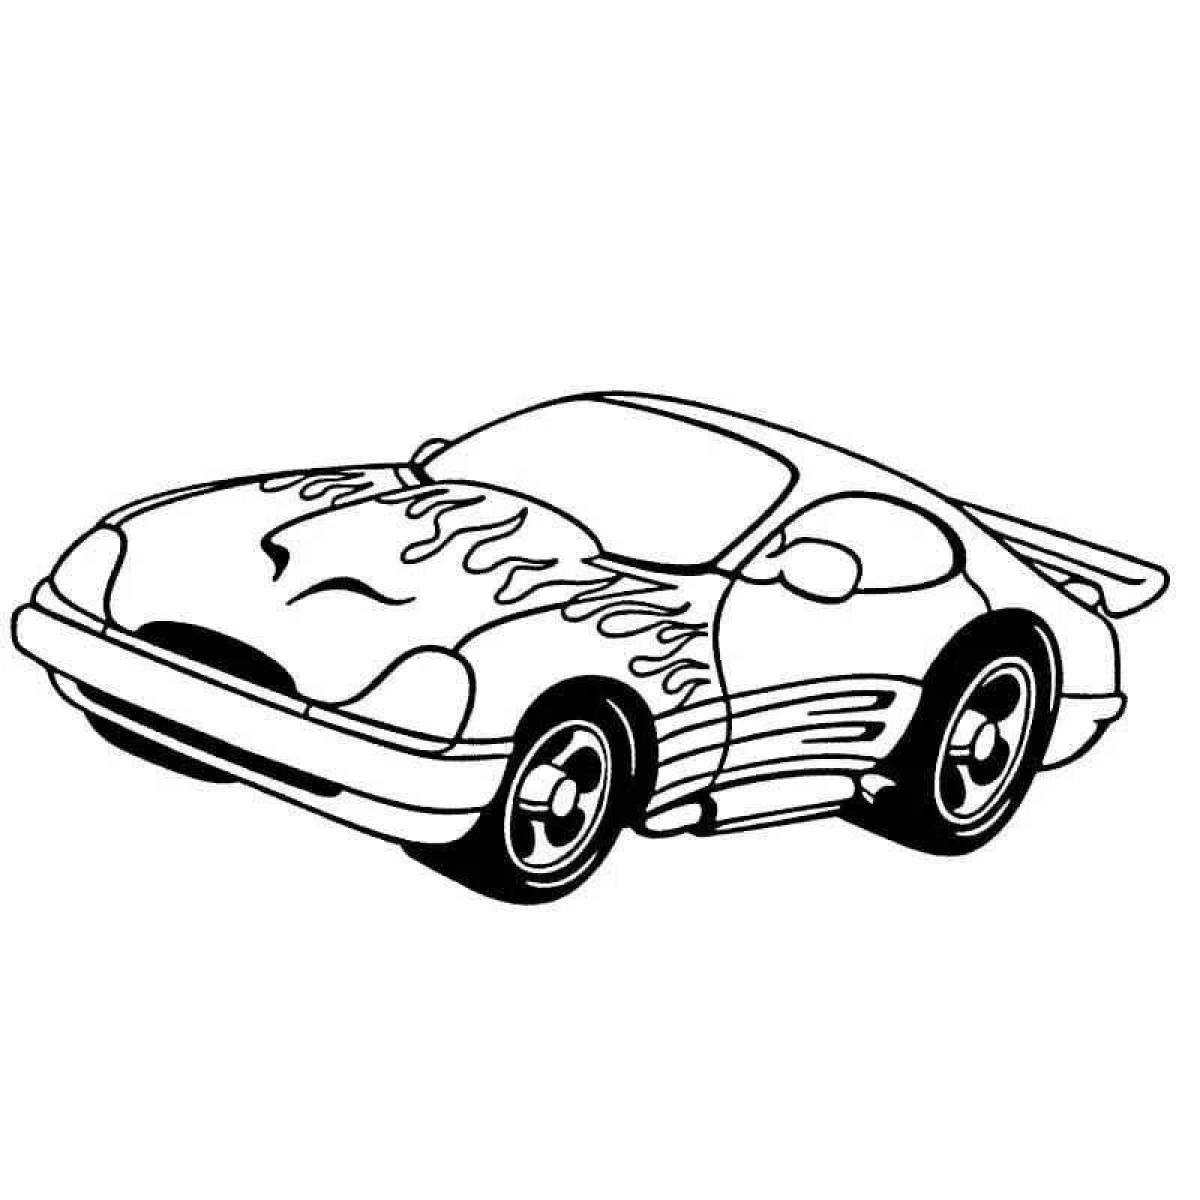 Coloring page of a bright racing car